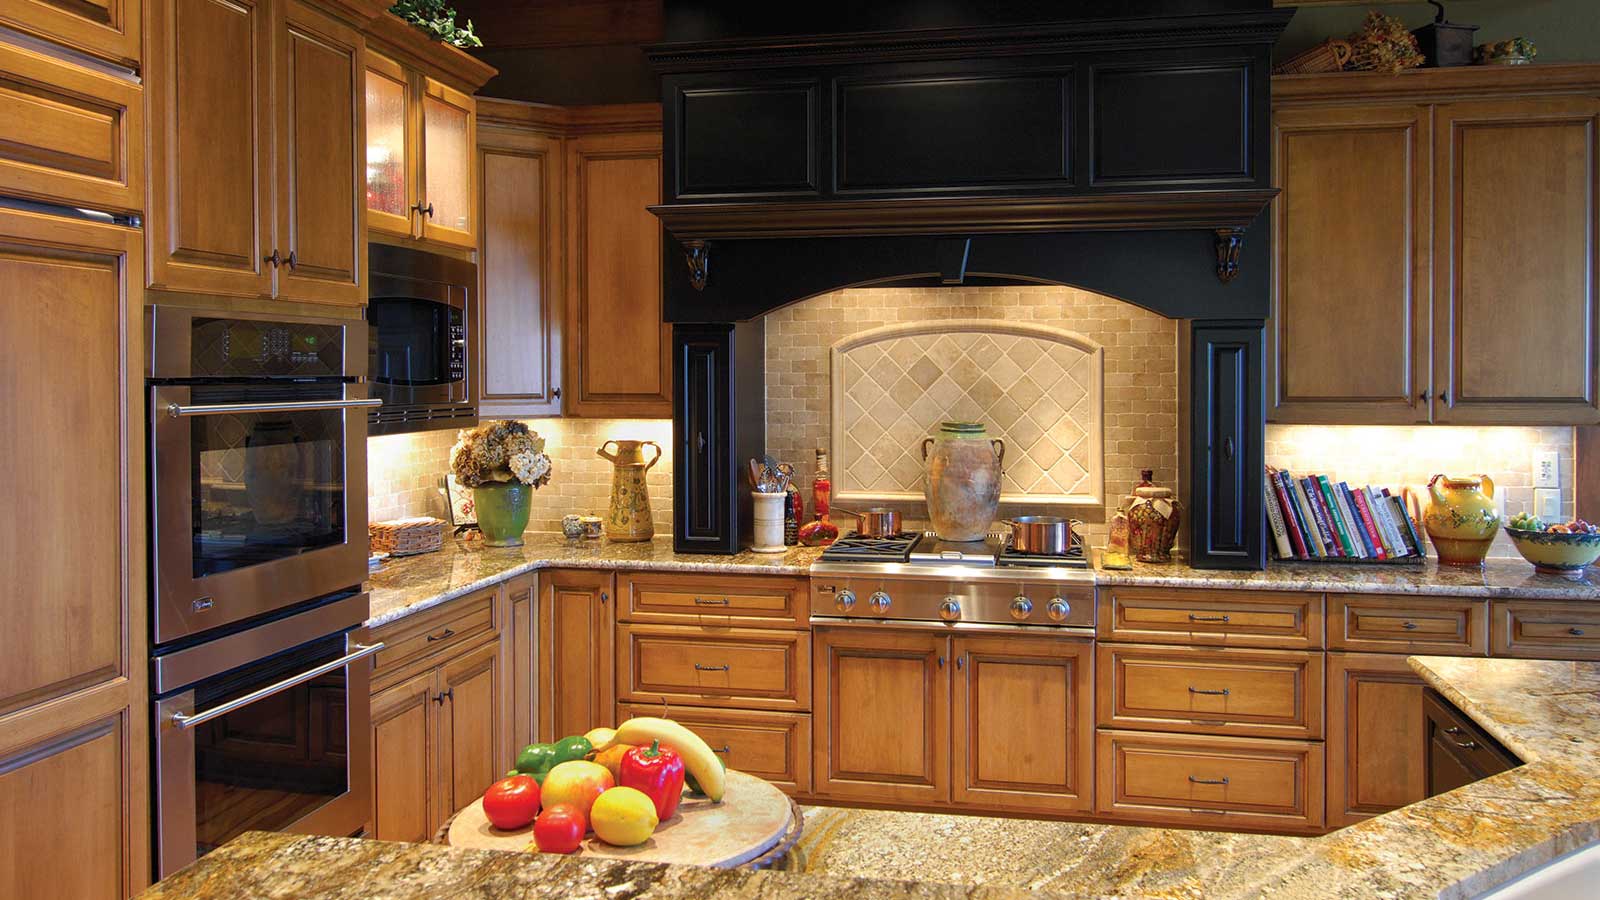 Kitchen cabinets designed by Precision Cabinets, Inc., located in Boone